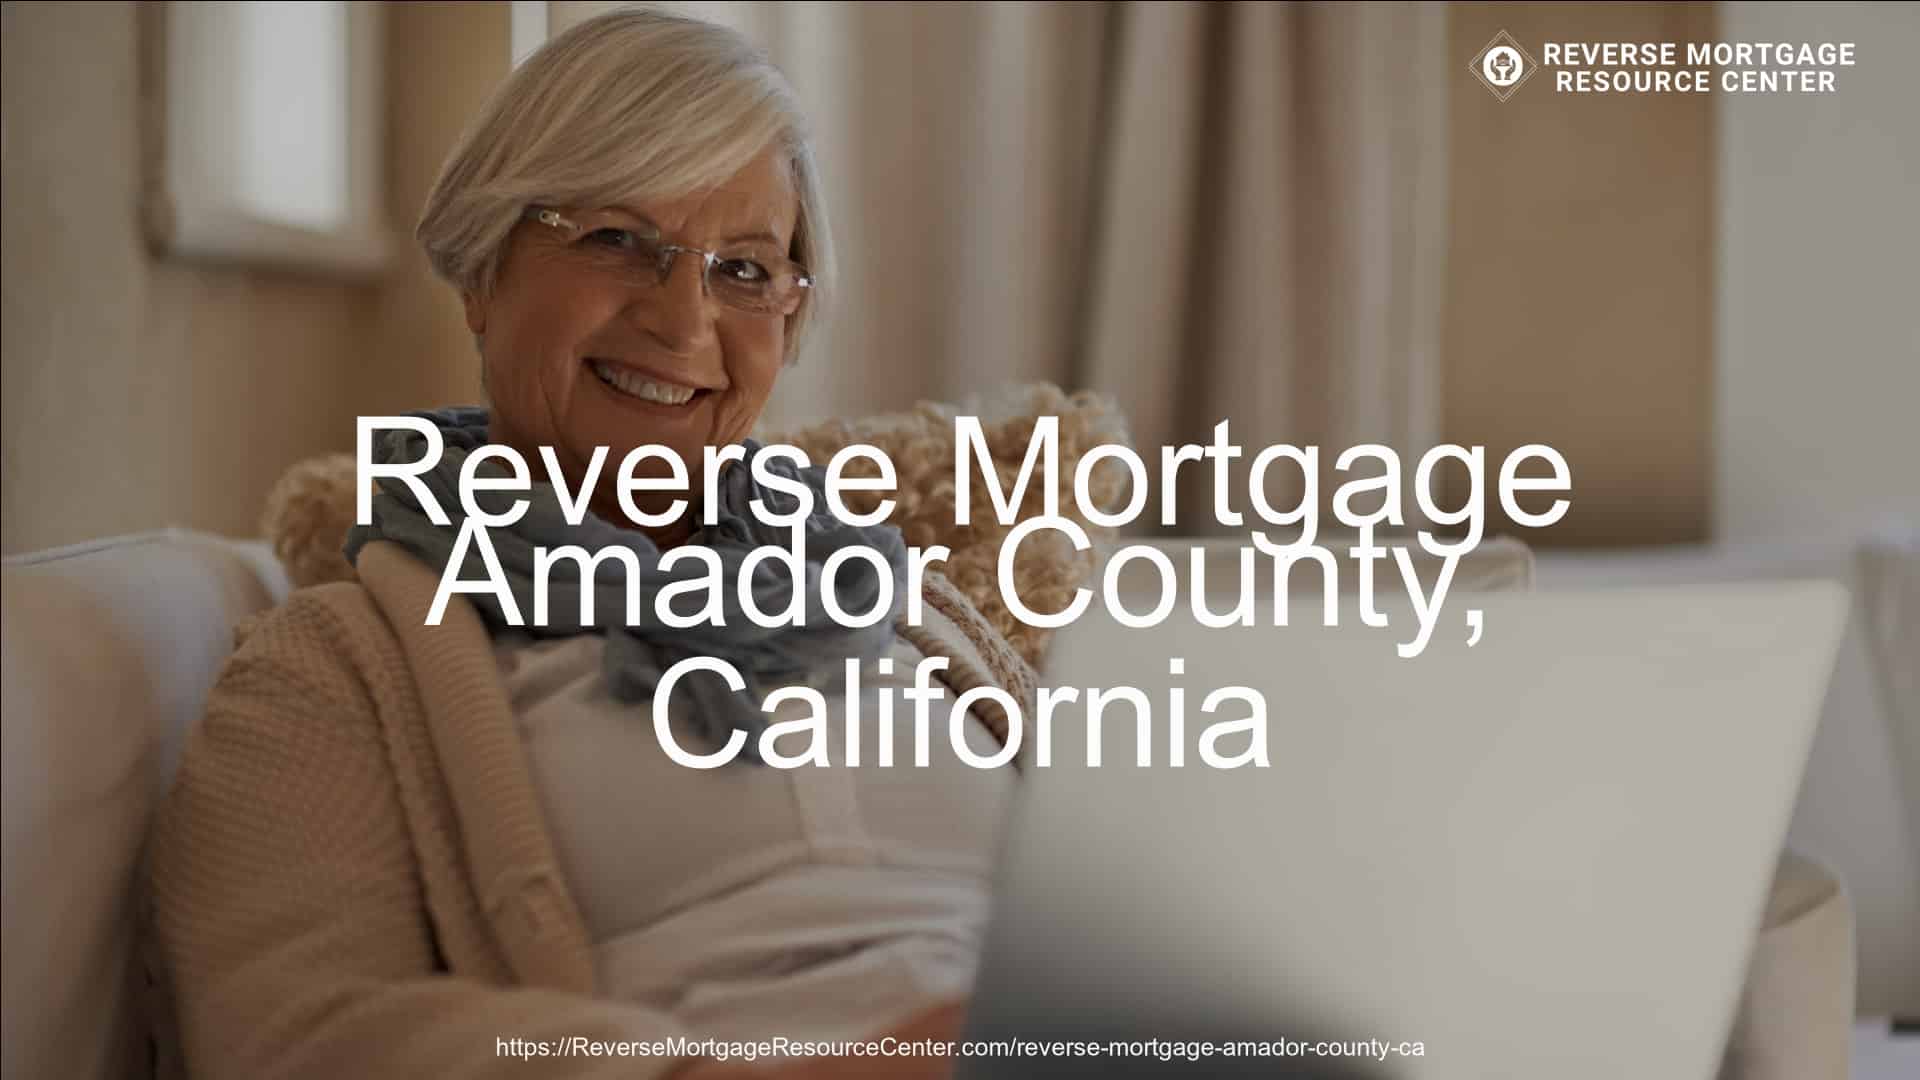 Reverse Mortgage in Amador County, CA